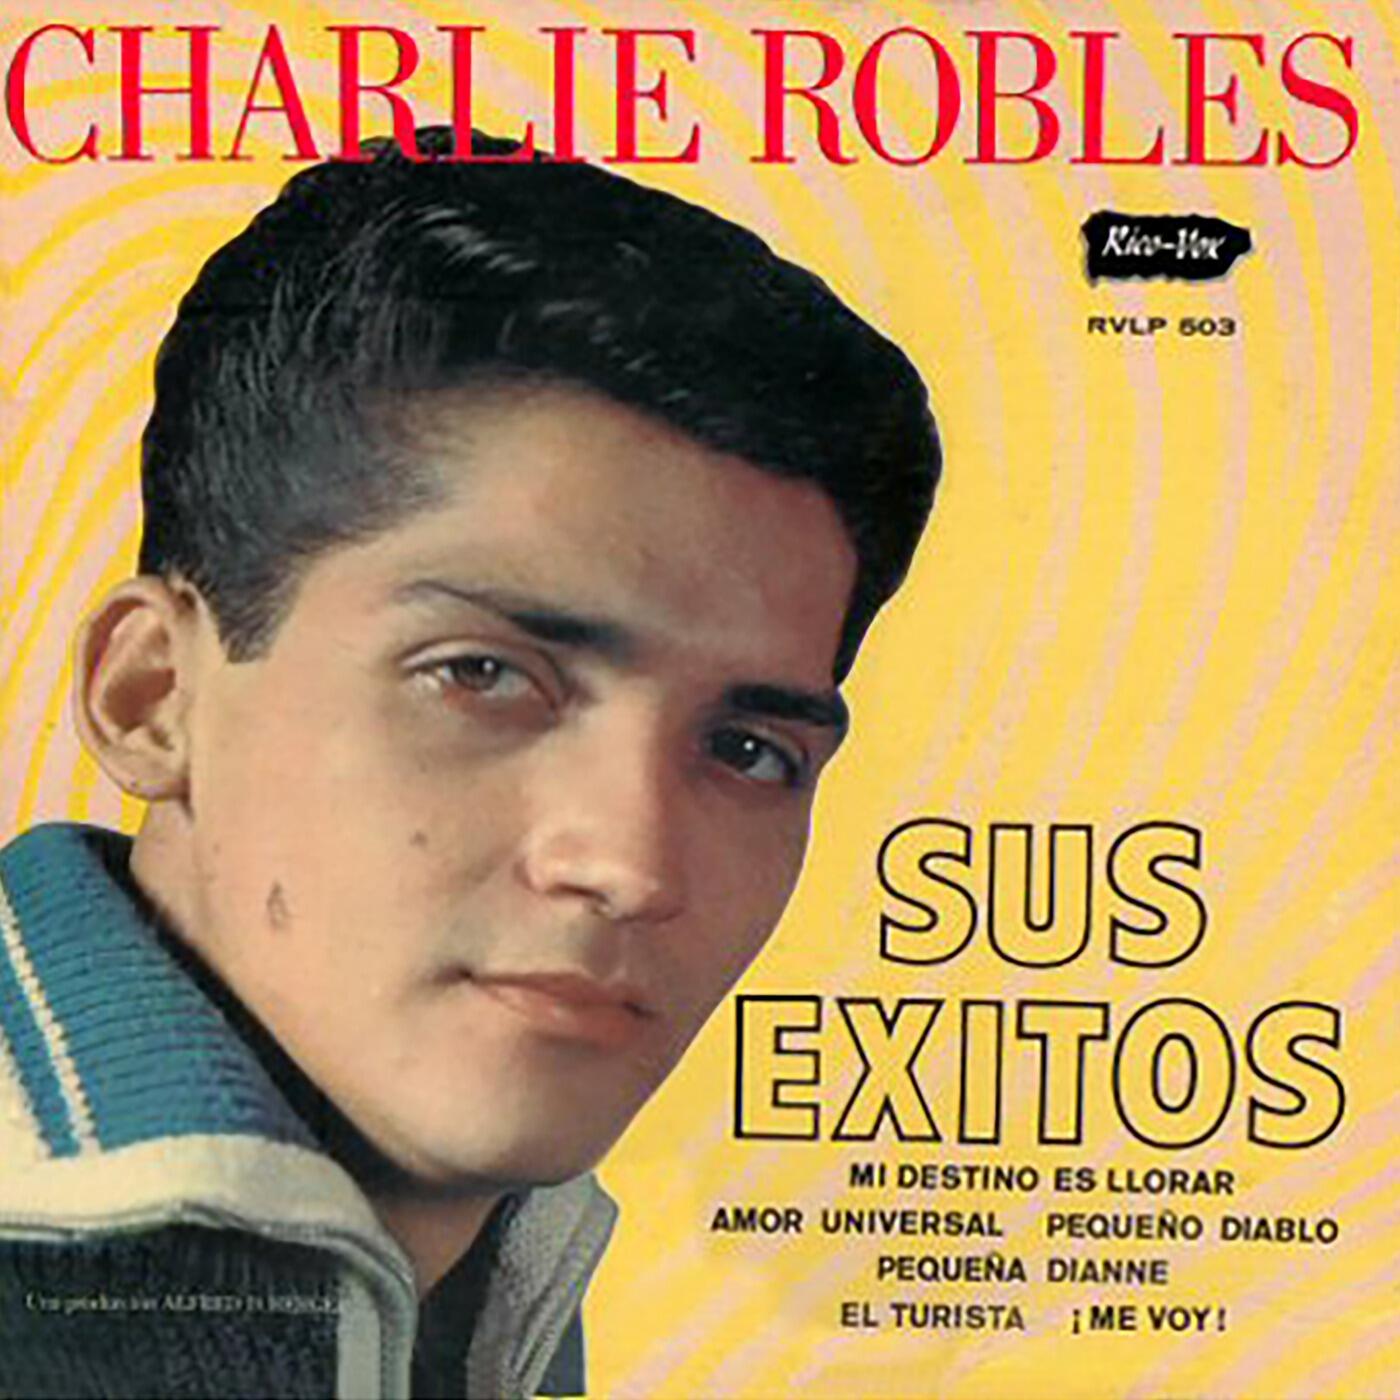 Charlie Robles - Sus Exitos (Remastered) | iHeart